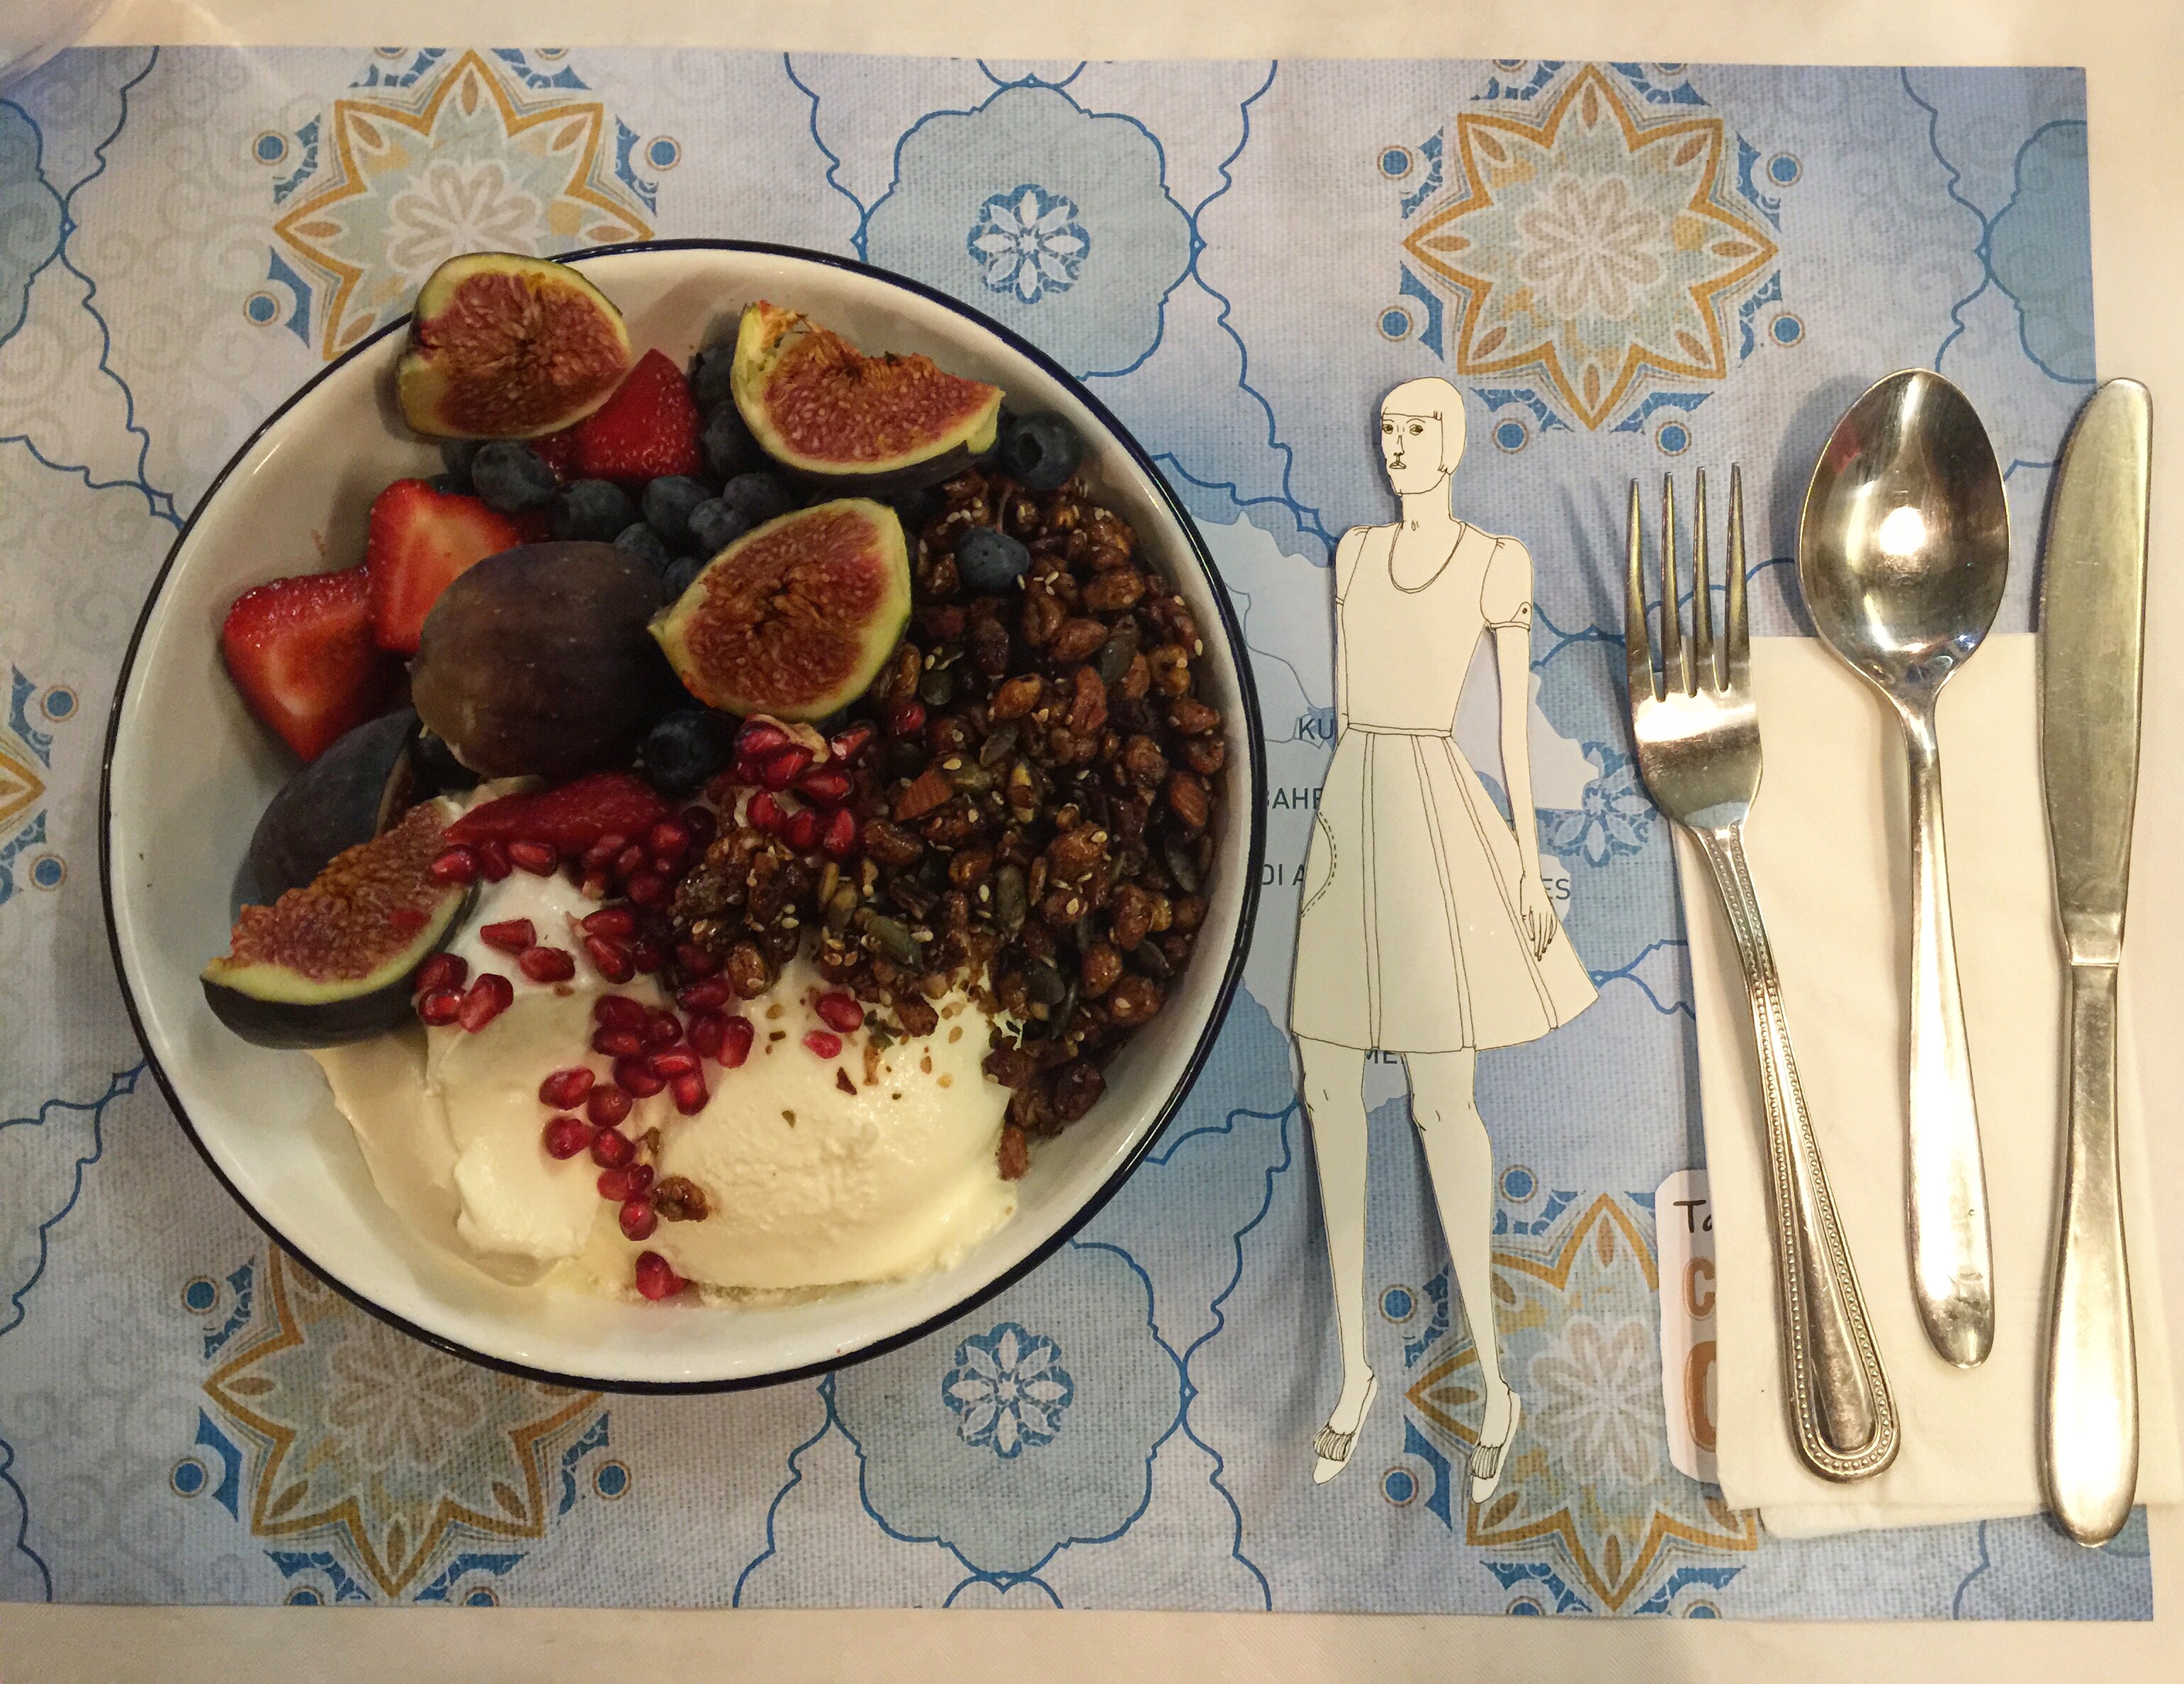 eve, figs, strawberries, lebneh, pomegranate, blueberries, cereal and nuts. imagine the explosion of flavors and texture in my mouth